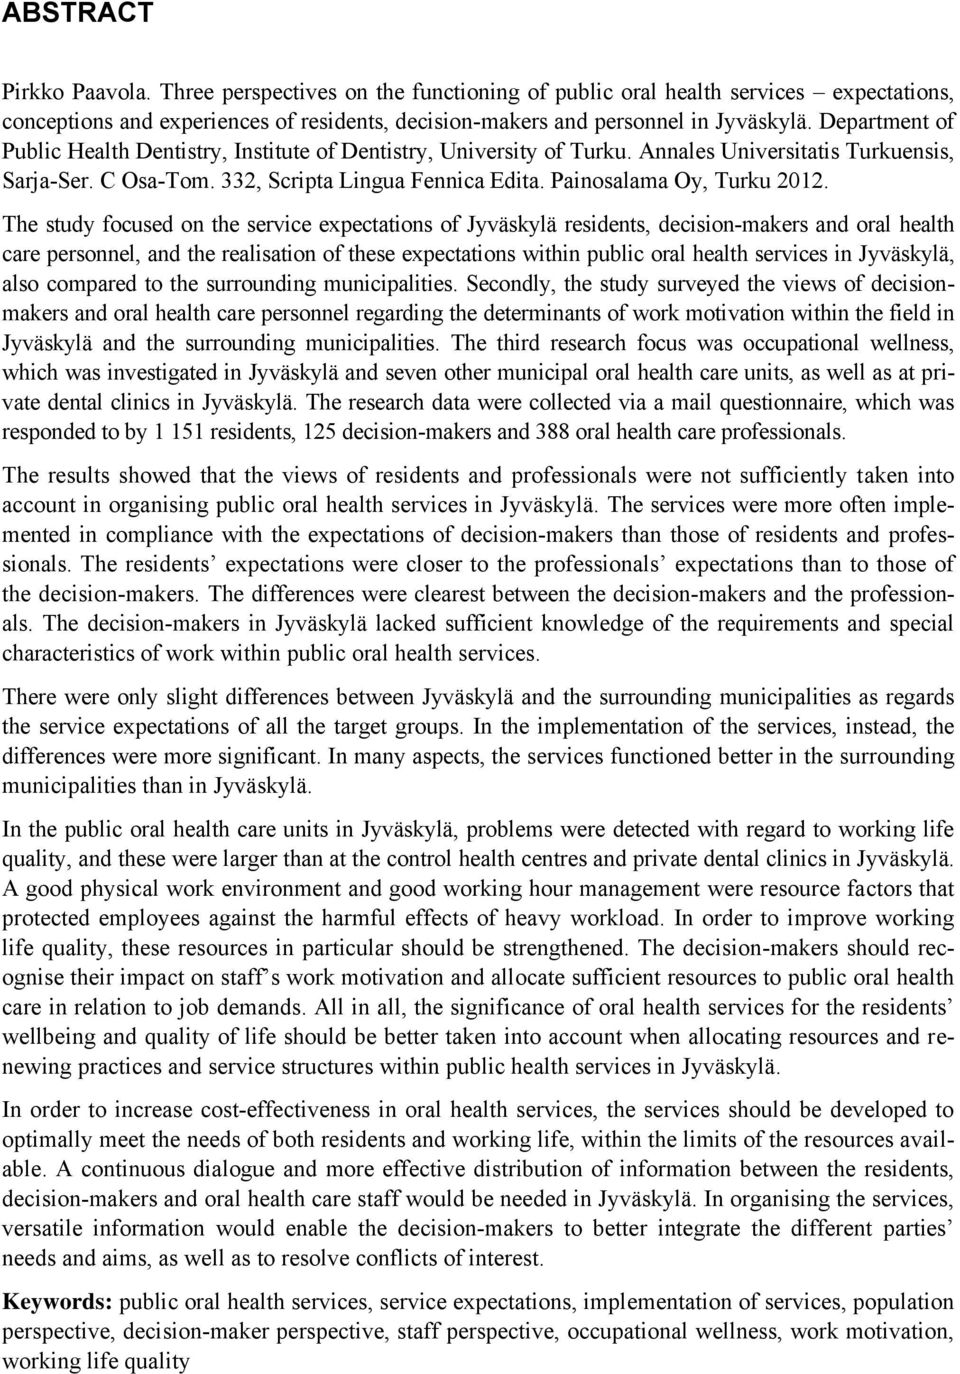 The study focused on the service expectations of Jyväskylä residents, decision-makers and oral health care personnel, and the realisation of these expectations within public oral health services in